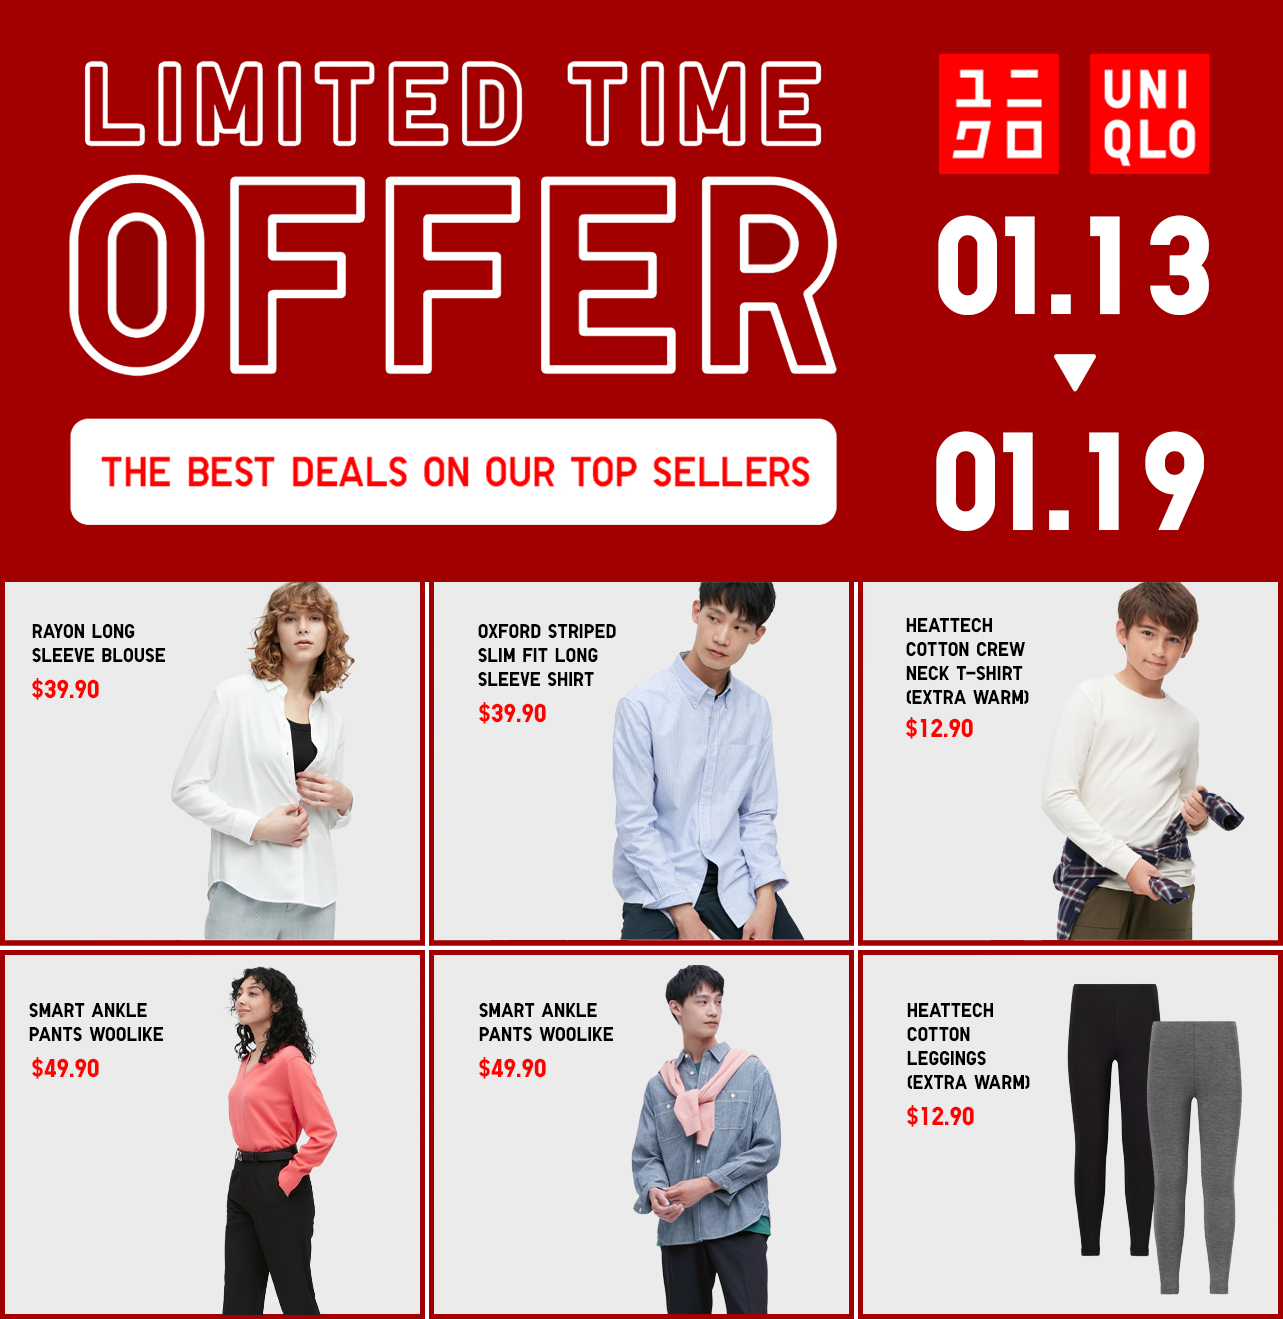 UNIQLO limitedtime offers promotions  Gallery posted by little wei  wei  Lemon8